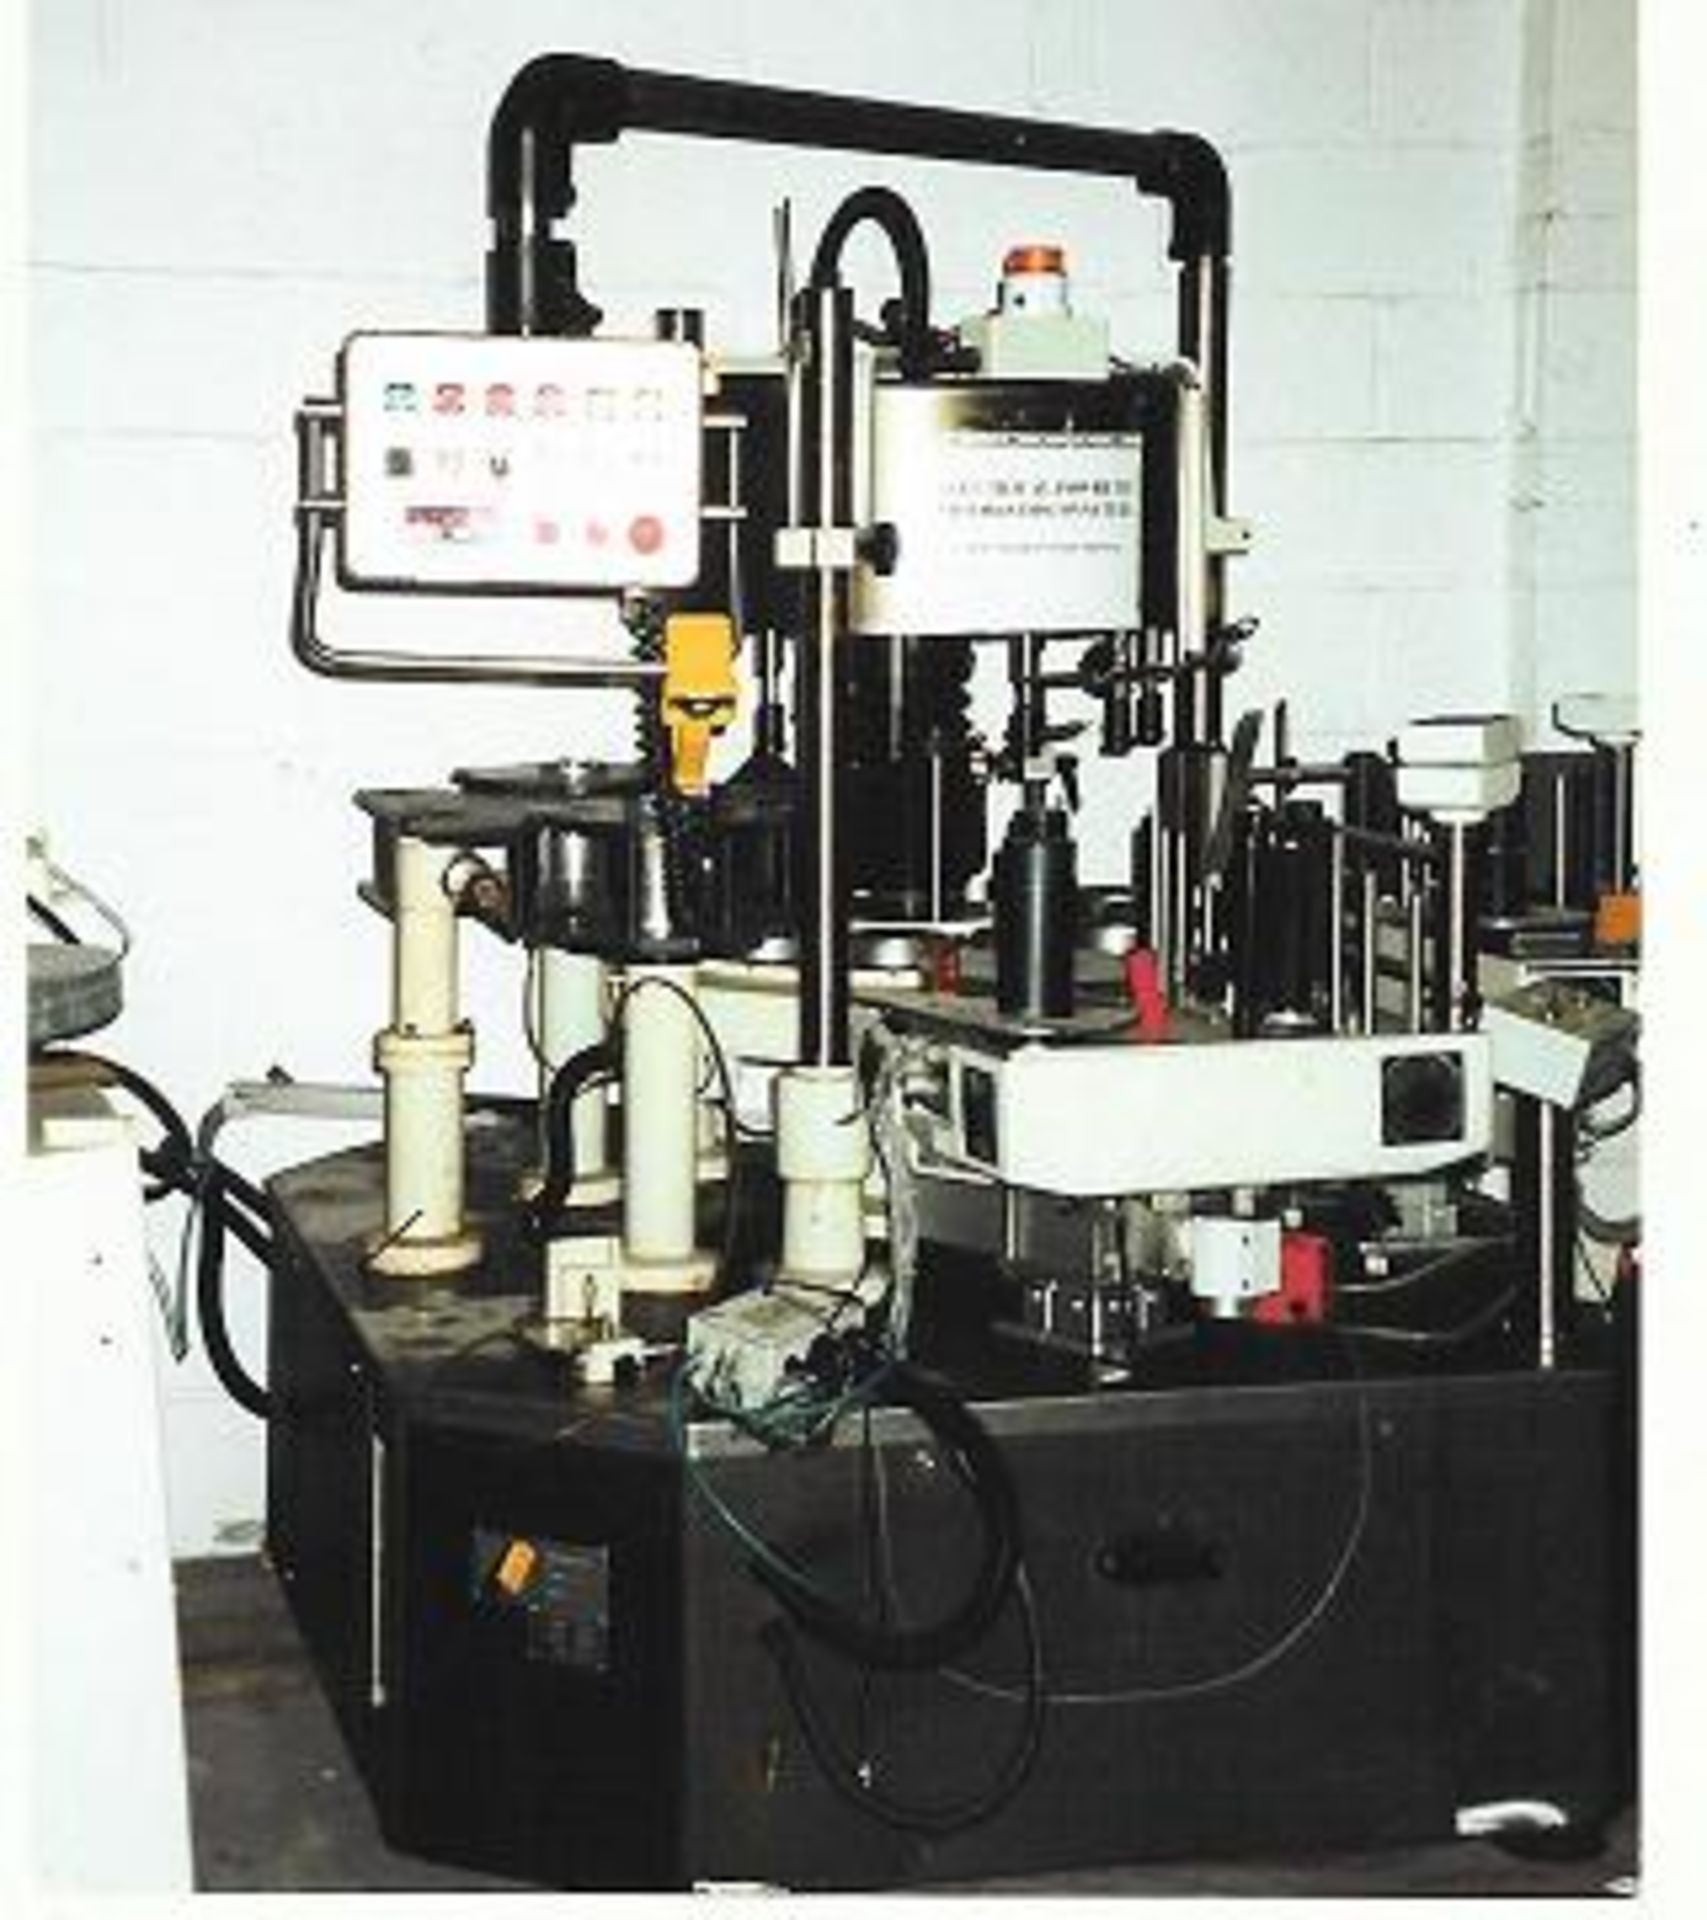 AVERY DENNISON - MODEL 350 ROTARY 2 HEADS LABELLING MACHINE